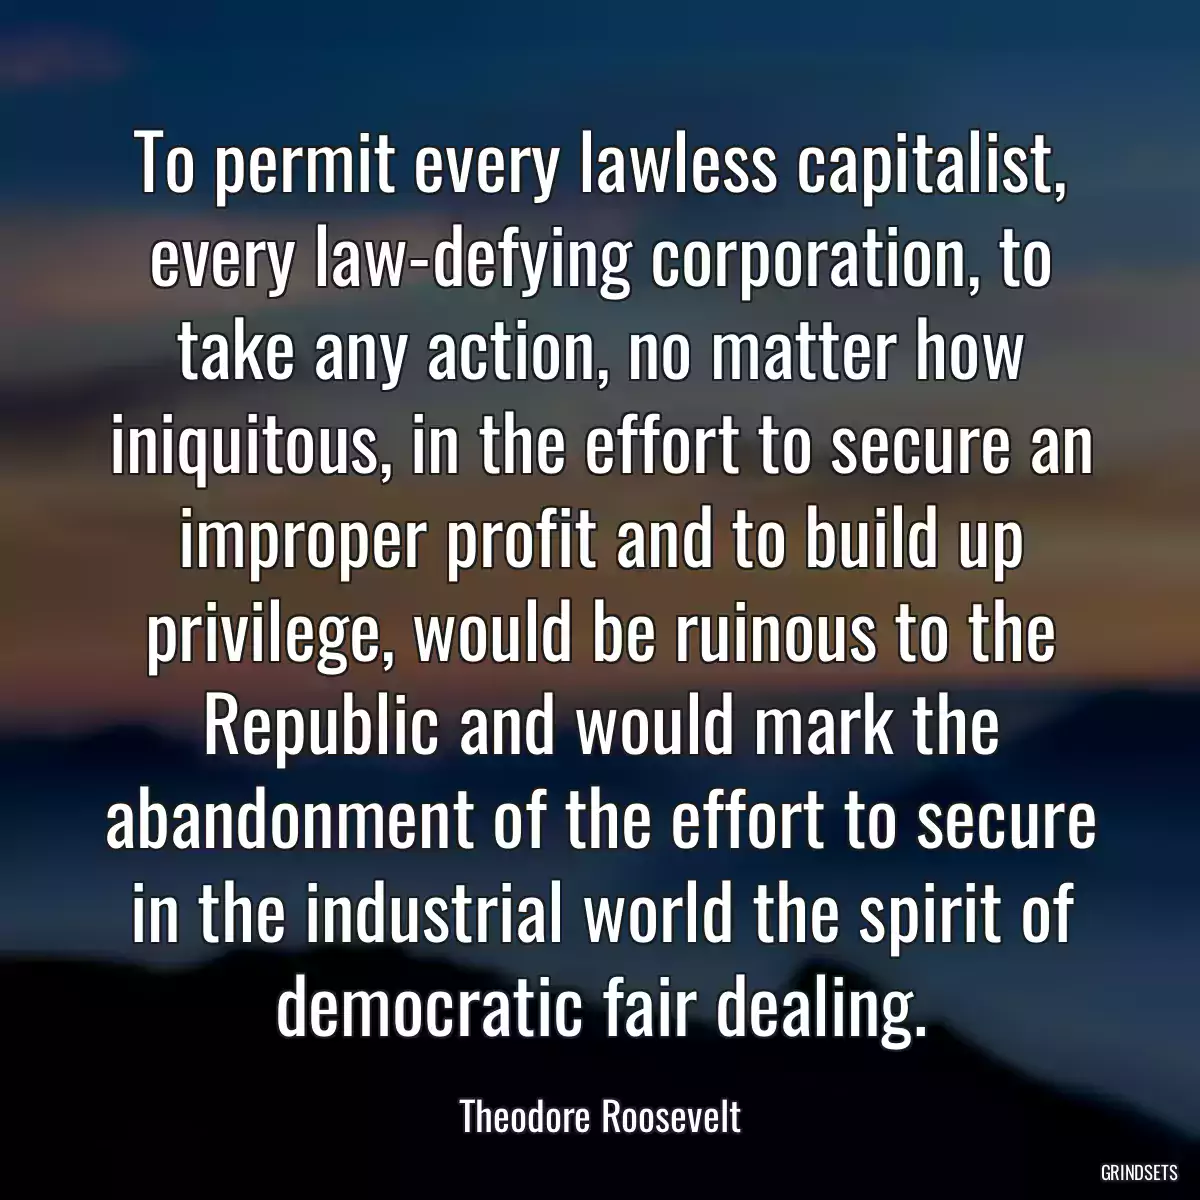 To permit every lawless capitalist, every law-defying corporation, to take any action, no matter how iniquitous, in the effort to secure an improper profit and to build up privilege, would be ruinous to the Republic and would mark the abandonment of the effort to secure in the industrial world the spirit of democratic fair dealing.